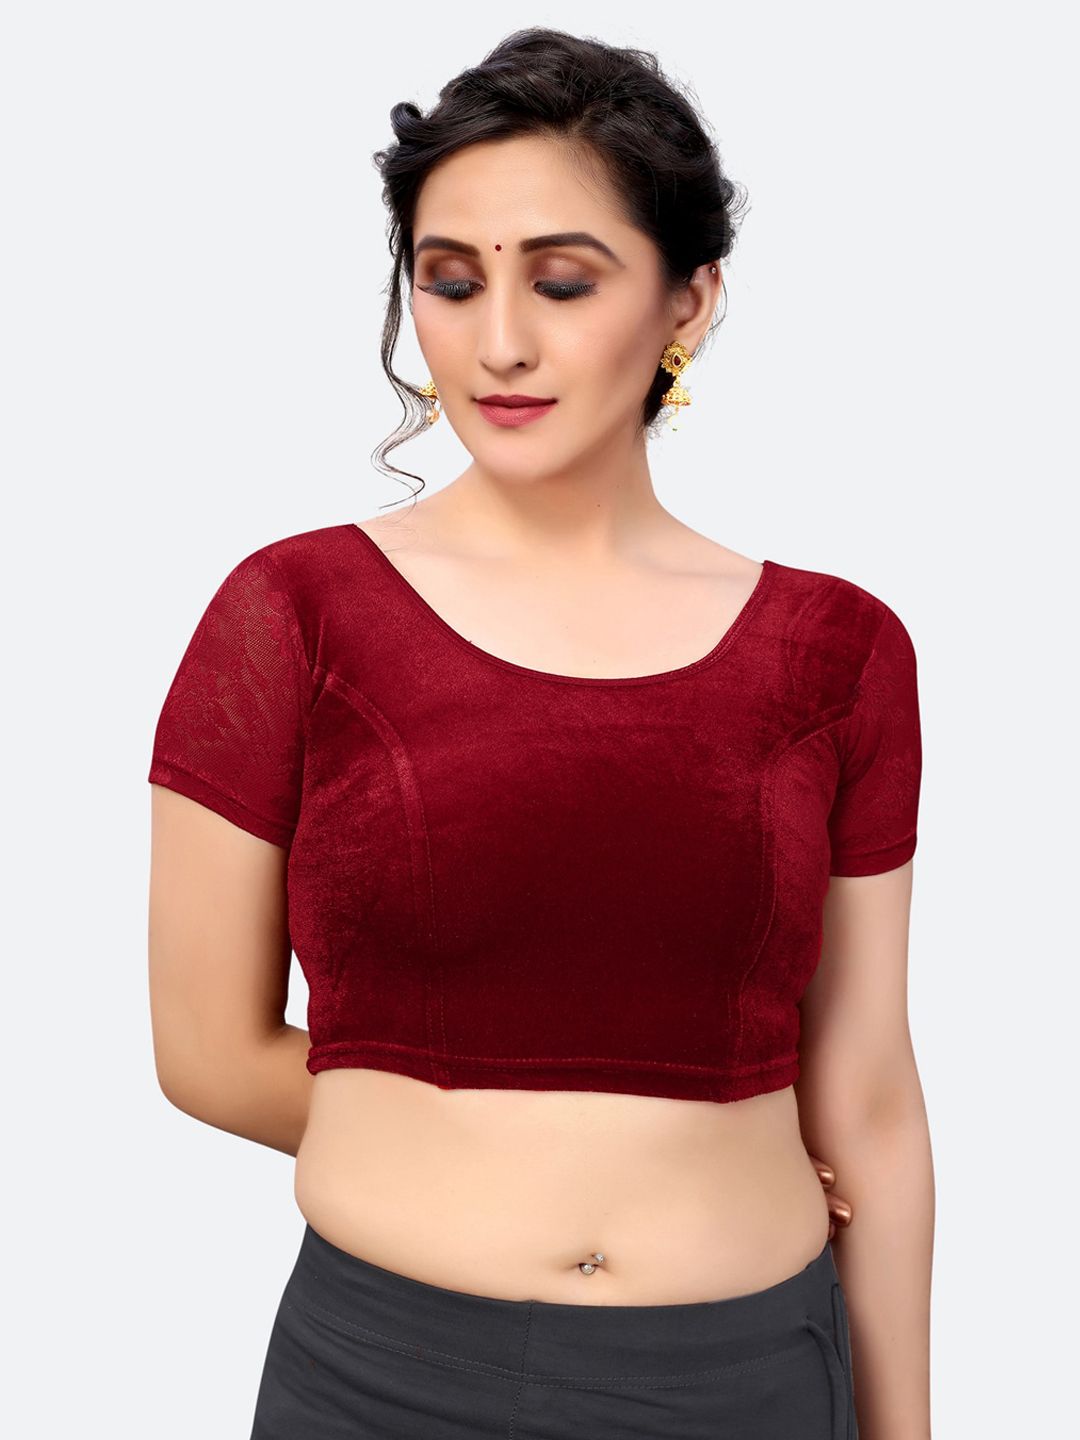 SIRIL Women Maroon Solid Saree Blouse Price in India